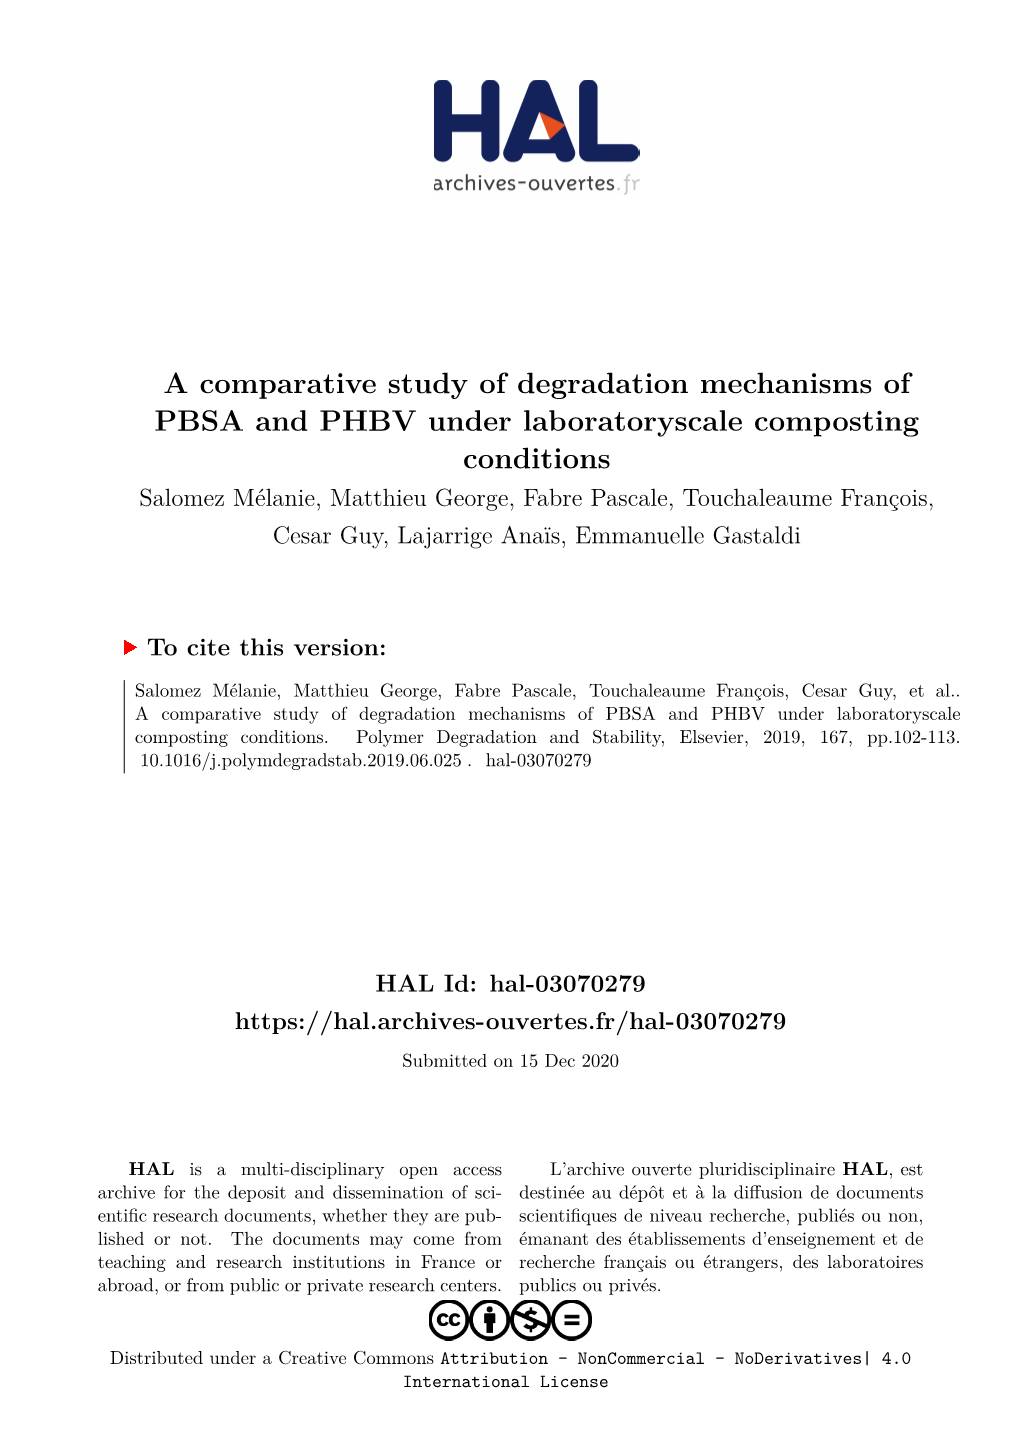 A Comparative Study of Degradation Mechanisms of PBSA and PHBV